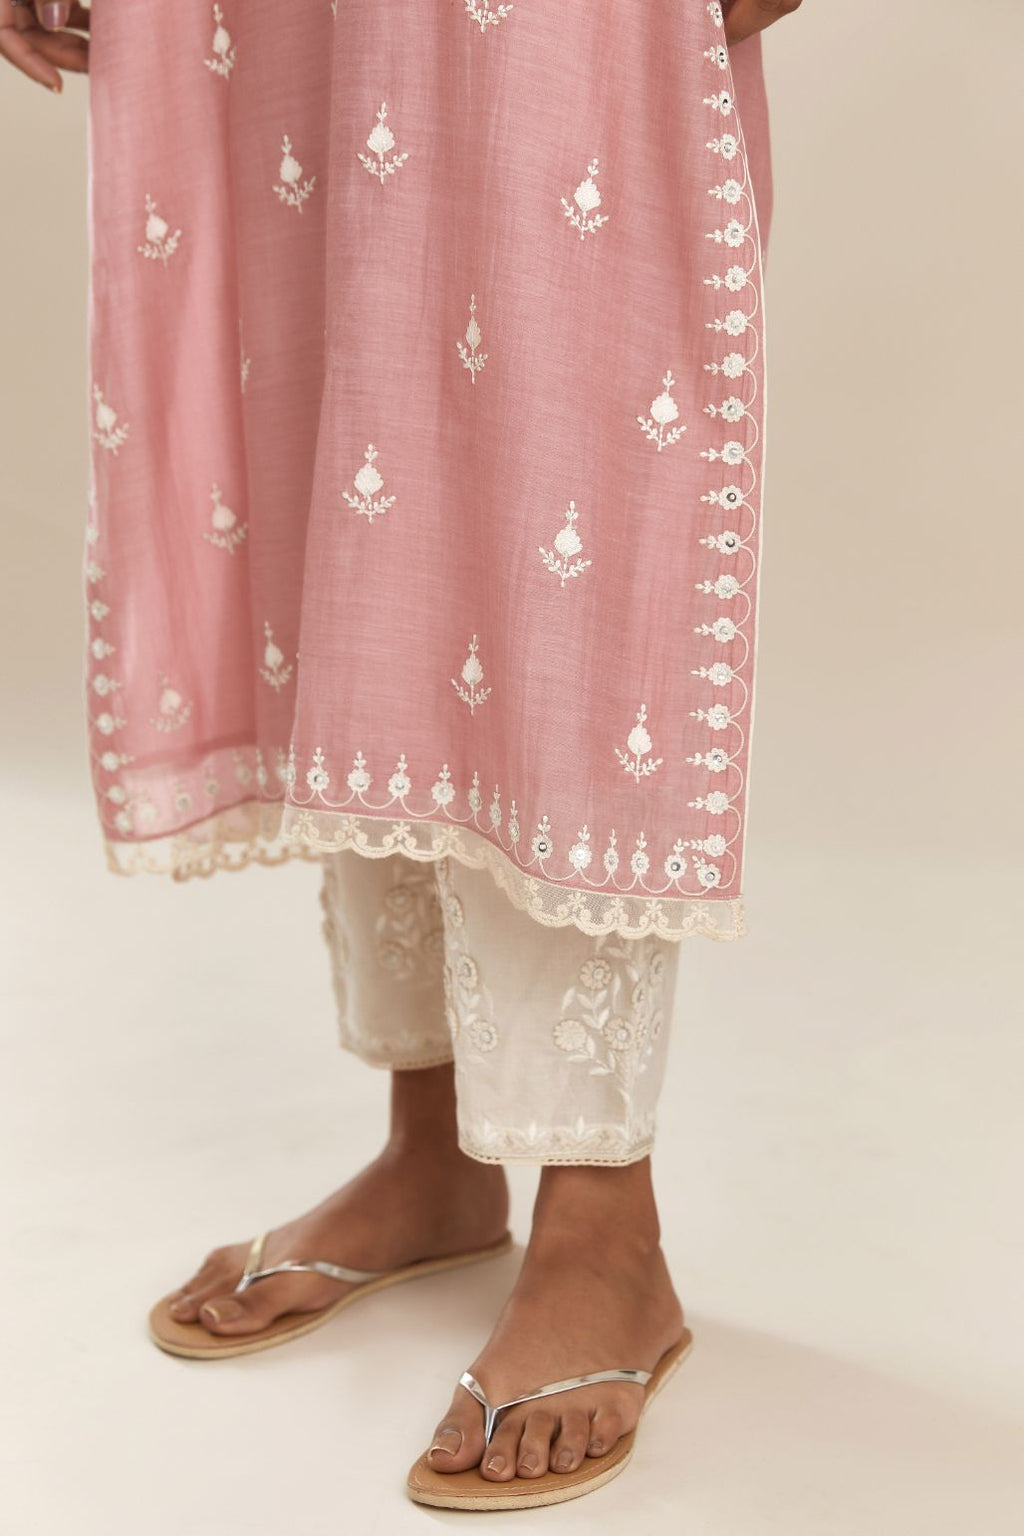 Pink cotton chanderi straight kurta set with all-over off white silk thread embroidery, highlighted with hand attached sequin and beads.